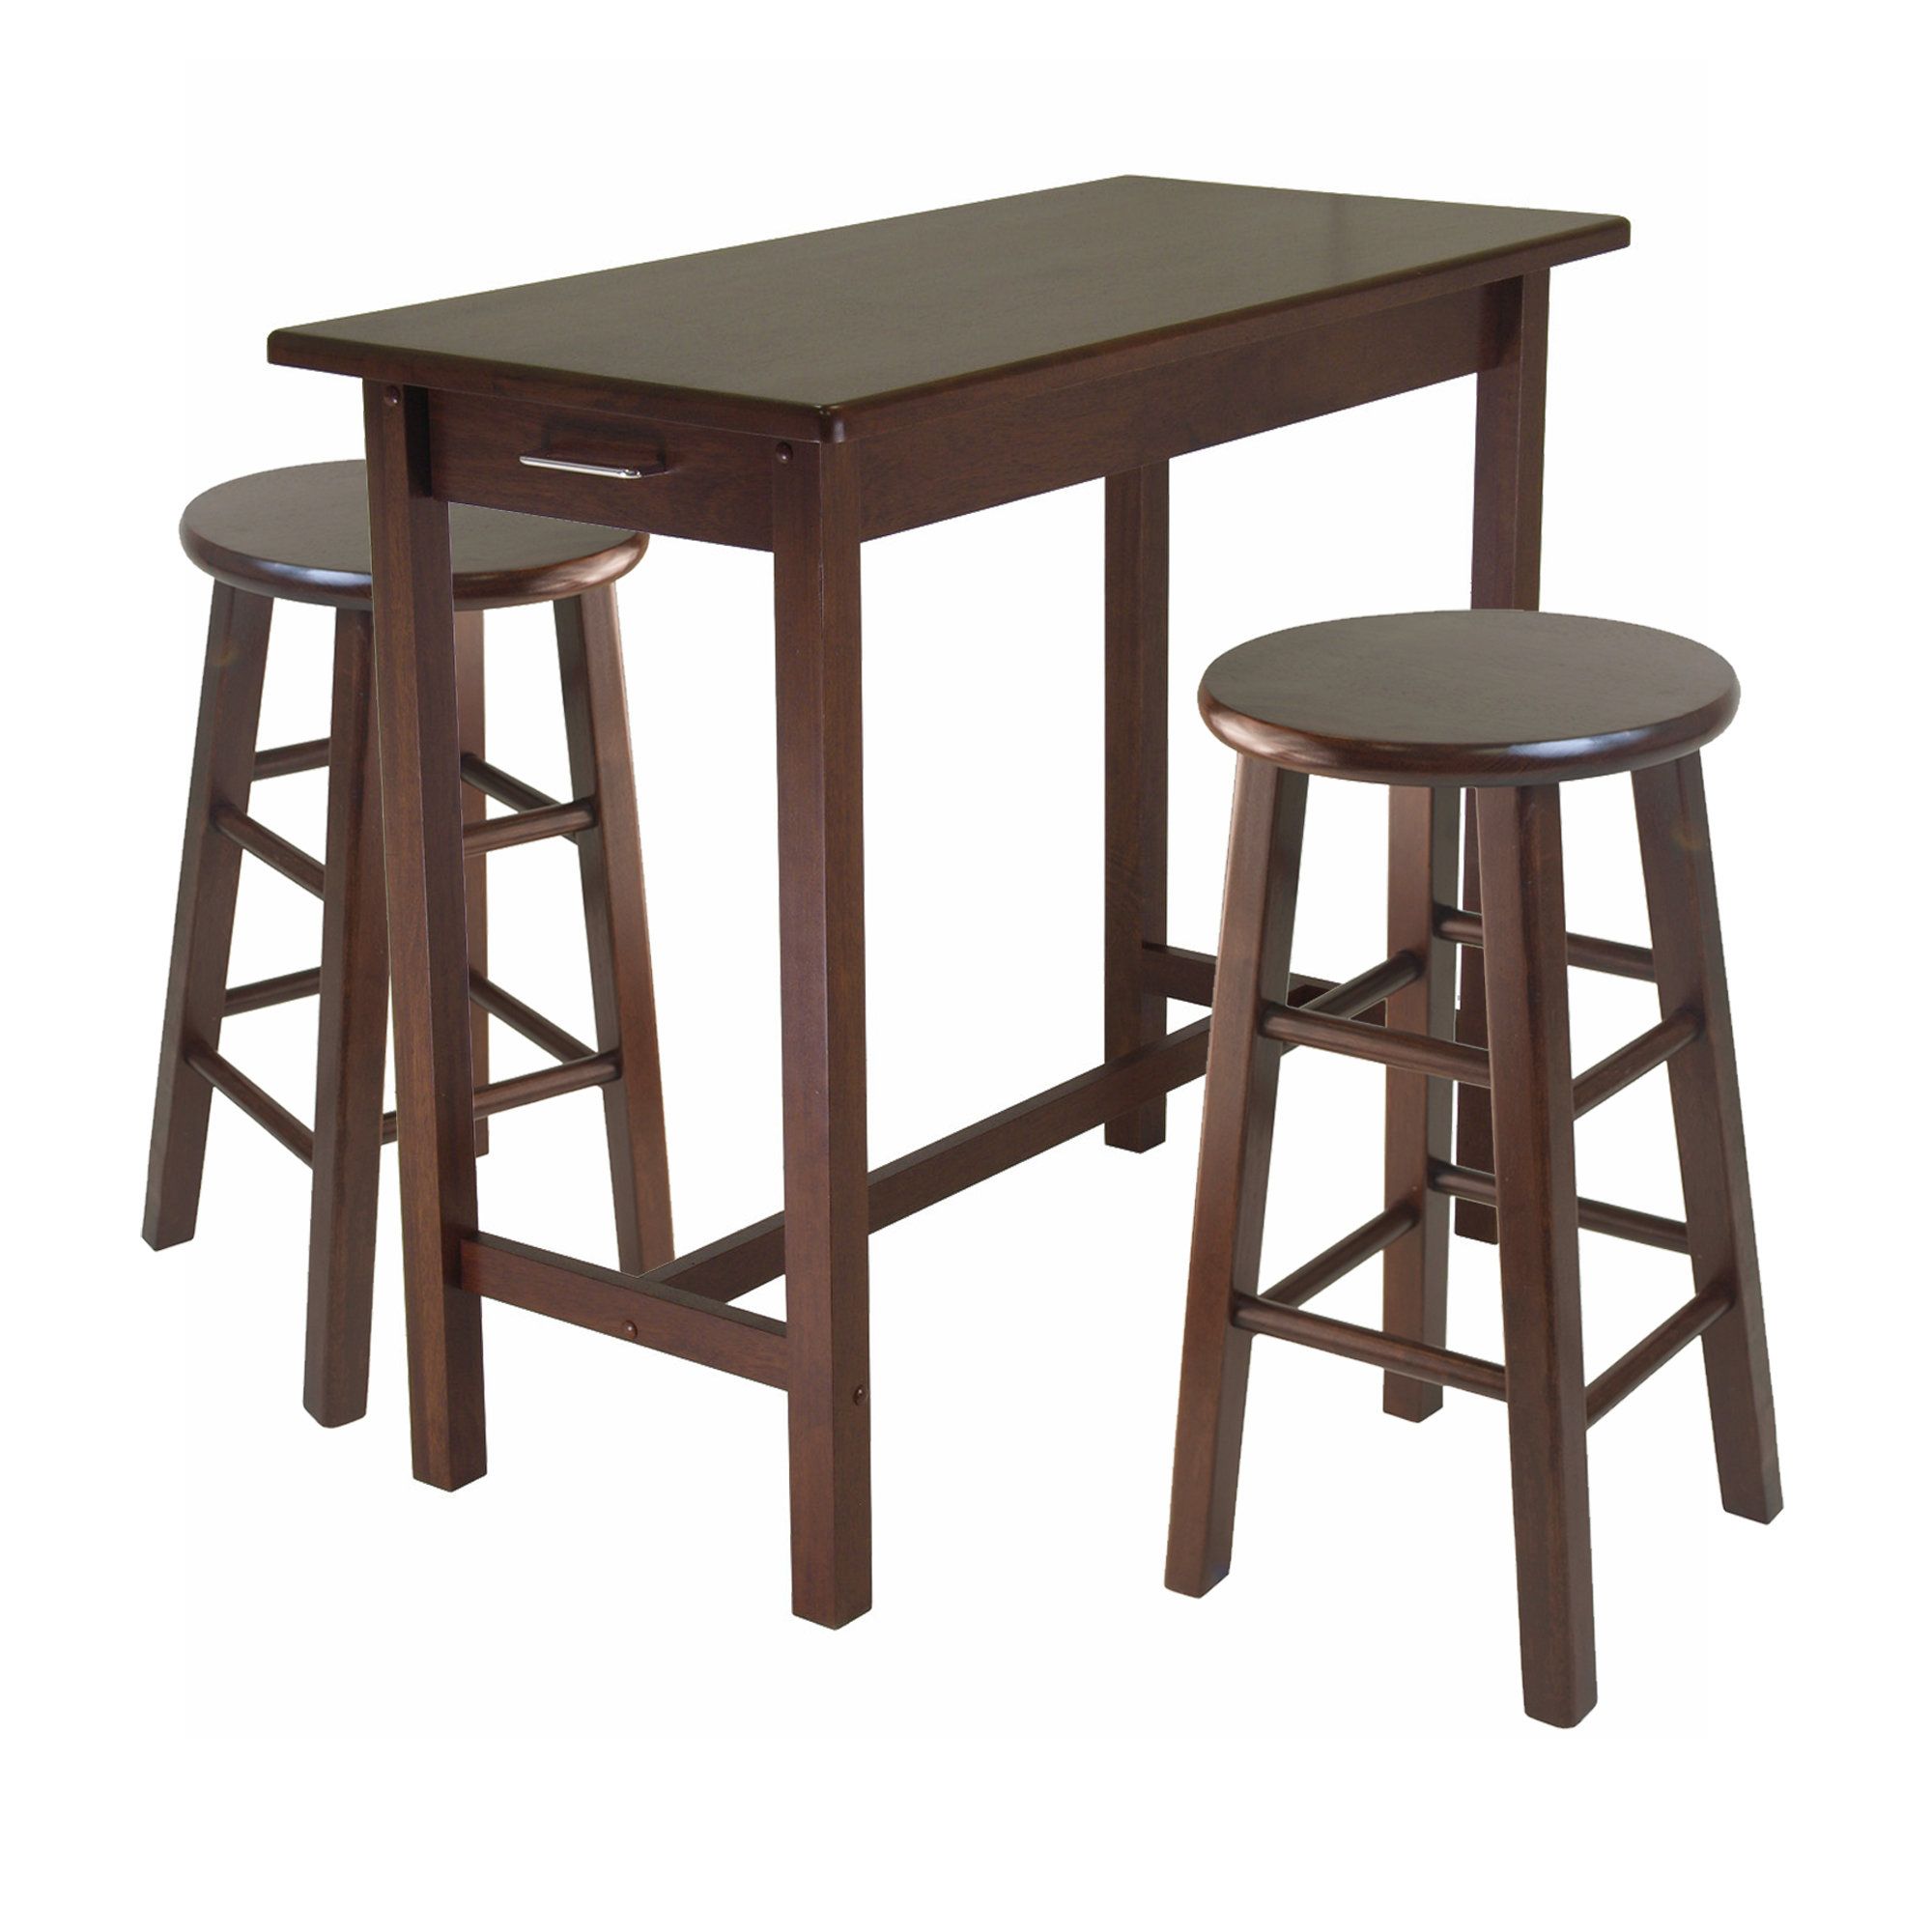 Wayfair Intended For Newest 3 Piece Breakfast Dining Sets (View 15 of 20)